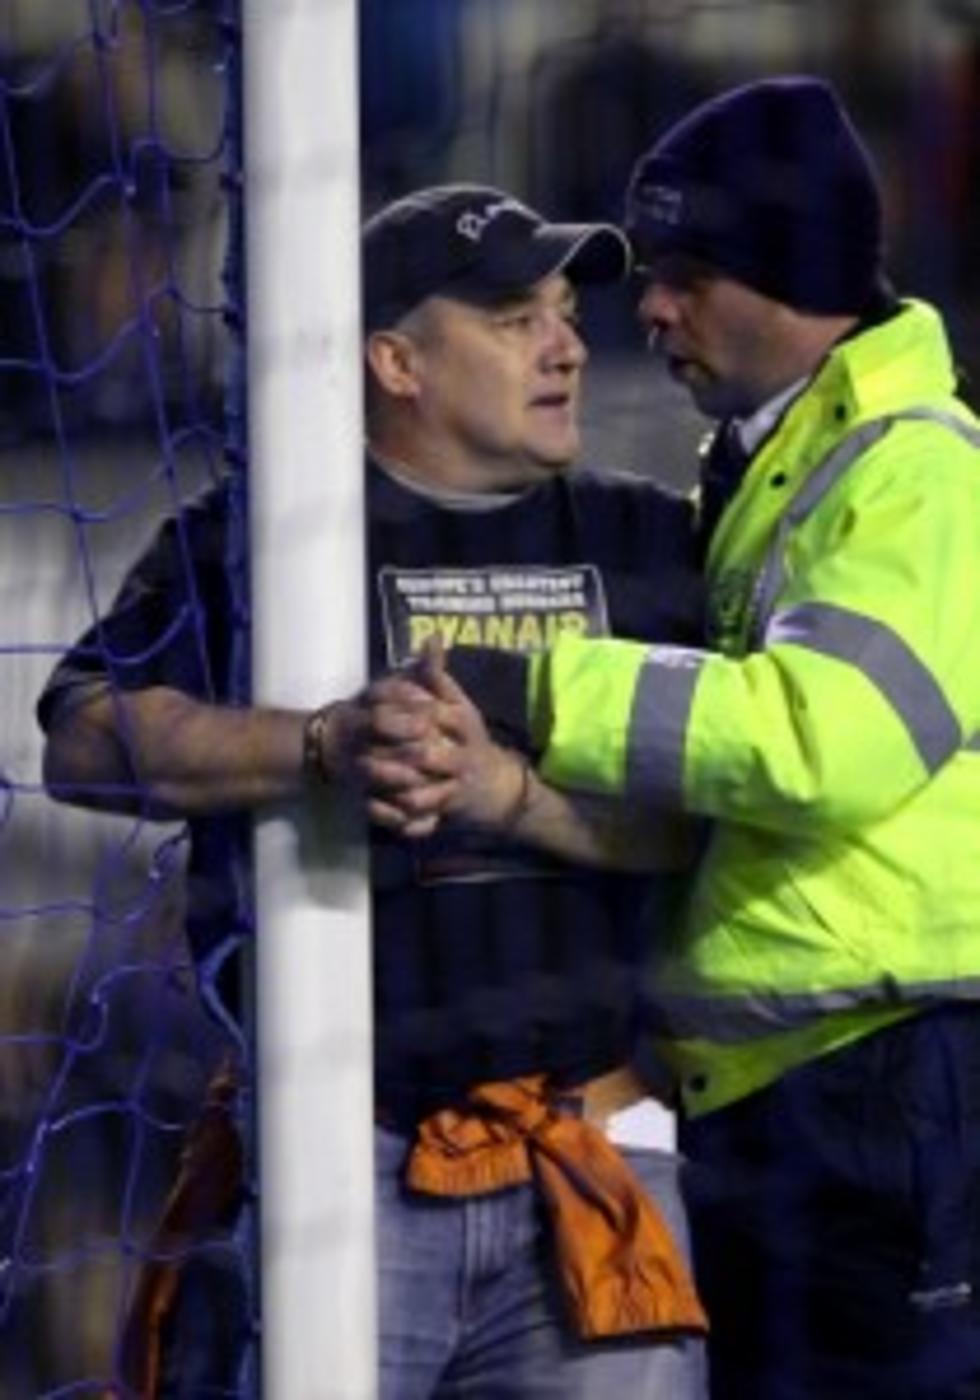 Man Handcuffs Himself To Goal Post During Everton-Manchester City Match [VIDEO]